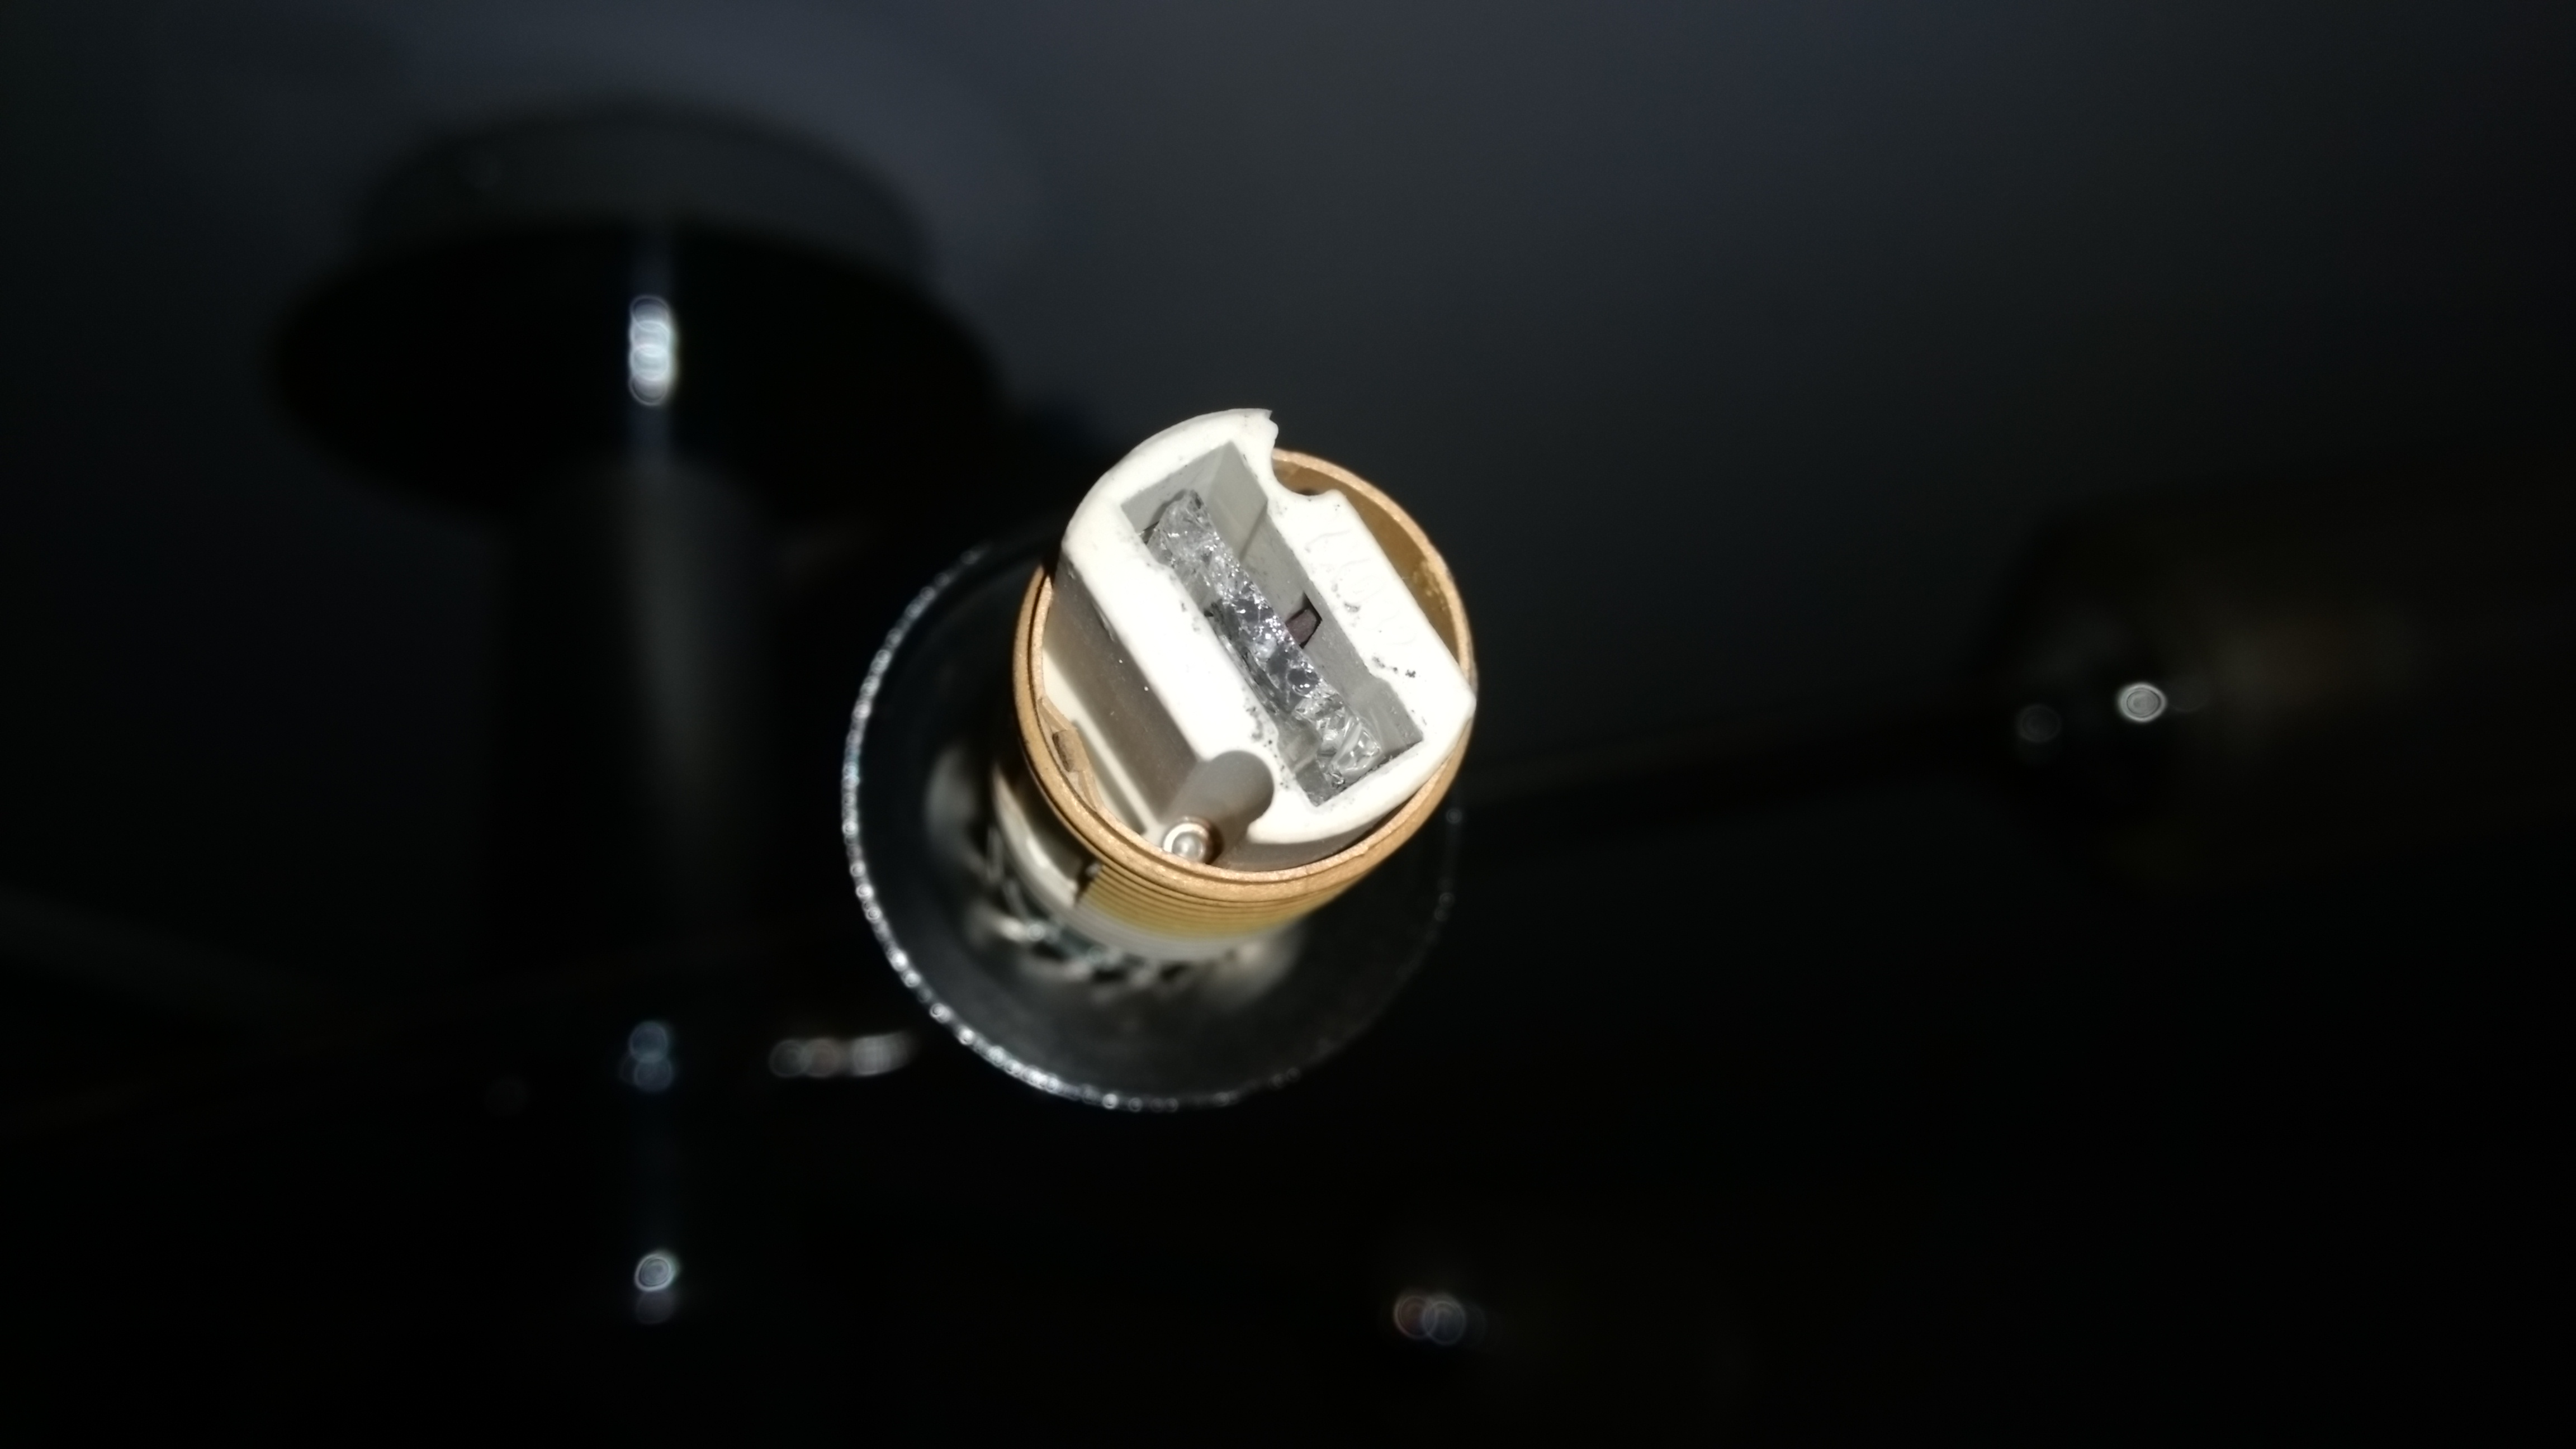 Broken G9 capsule - how to remove? - Page 1 - Homes, Gardens and DIY - PistonHeads